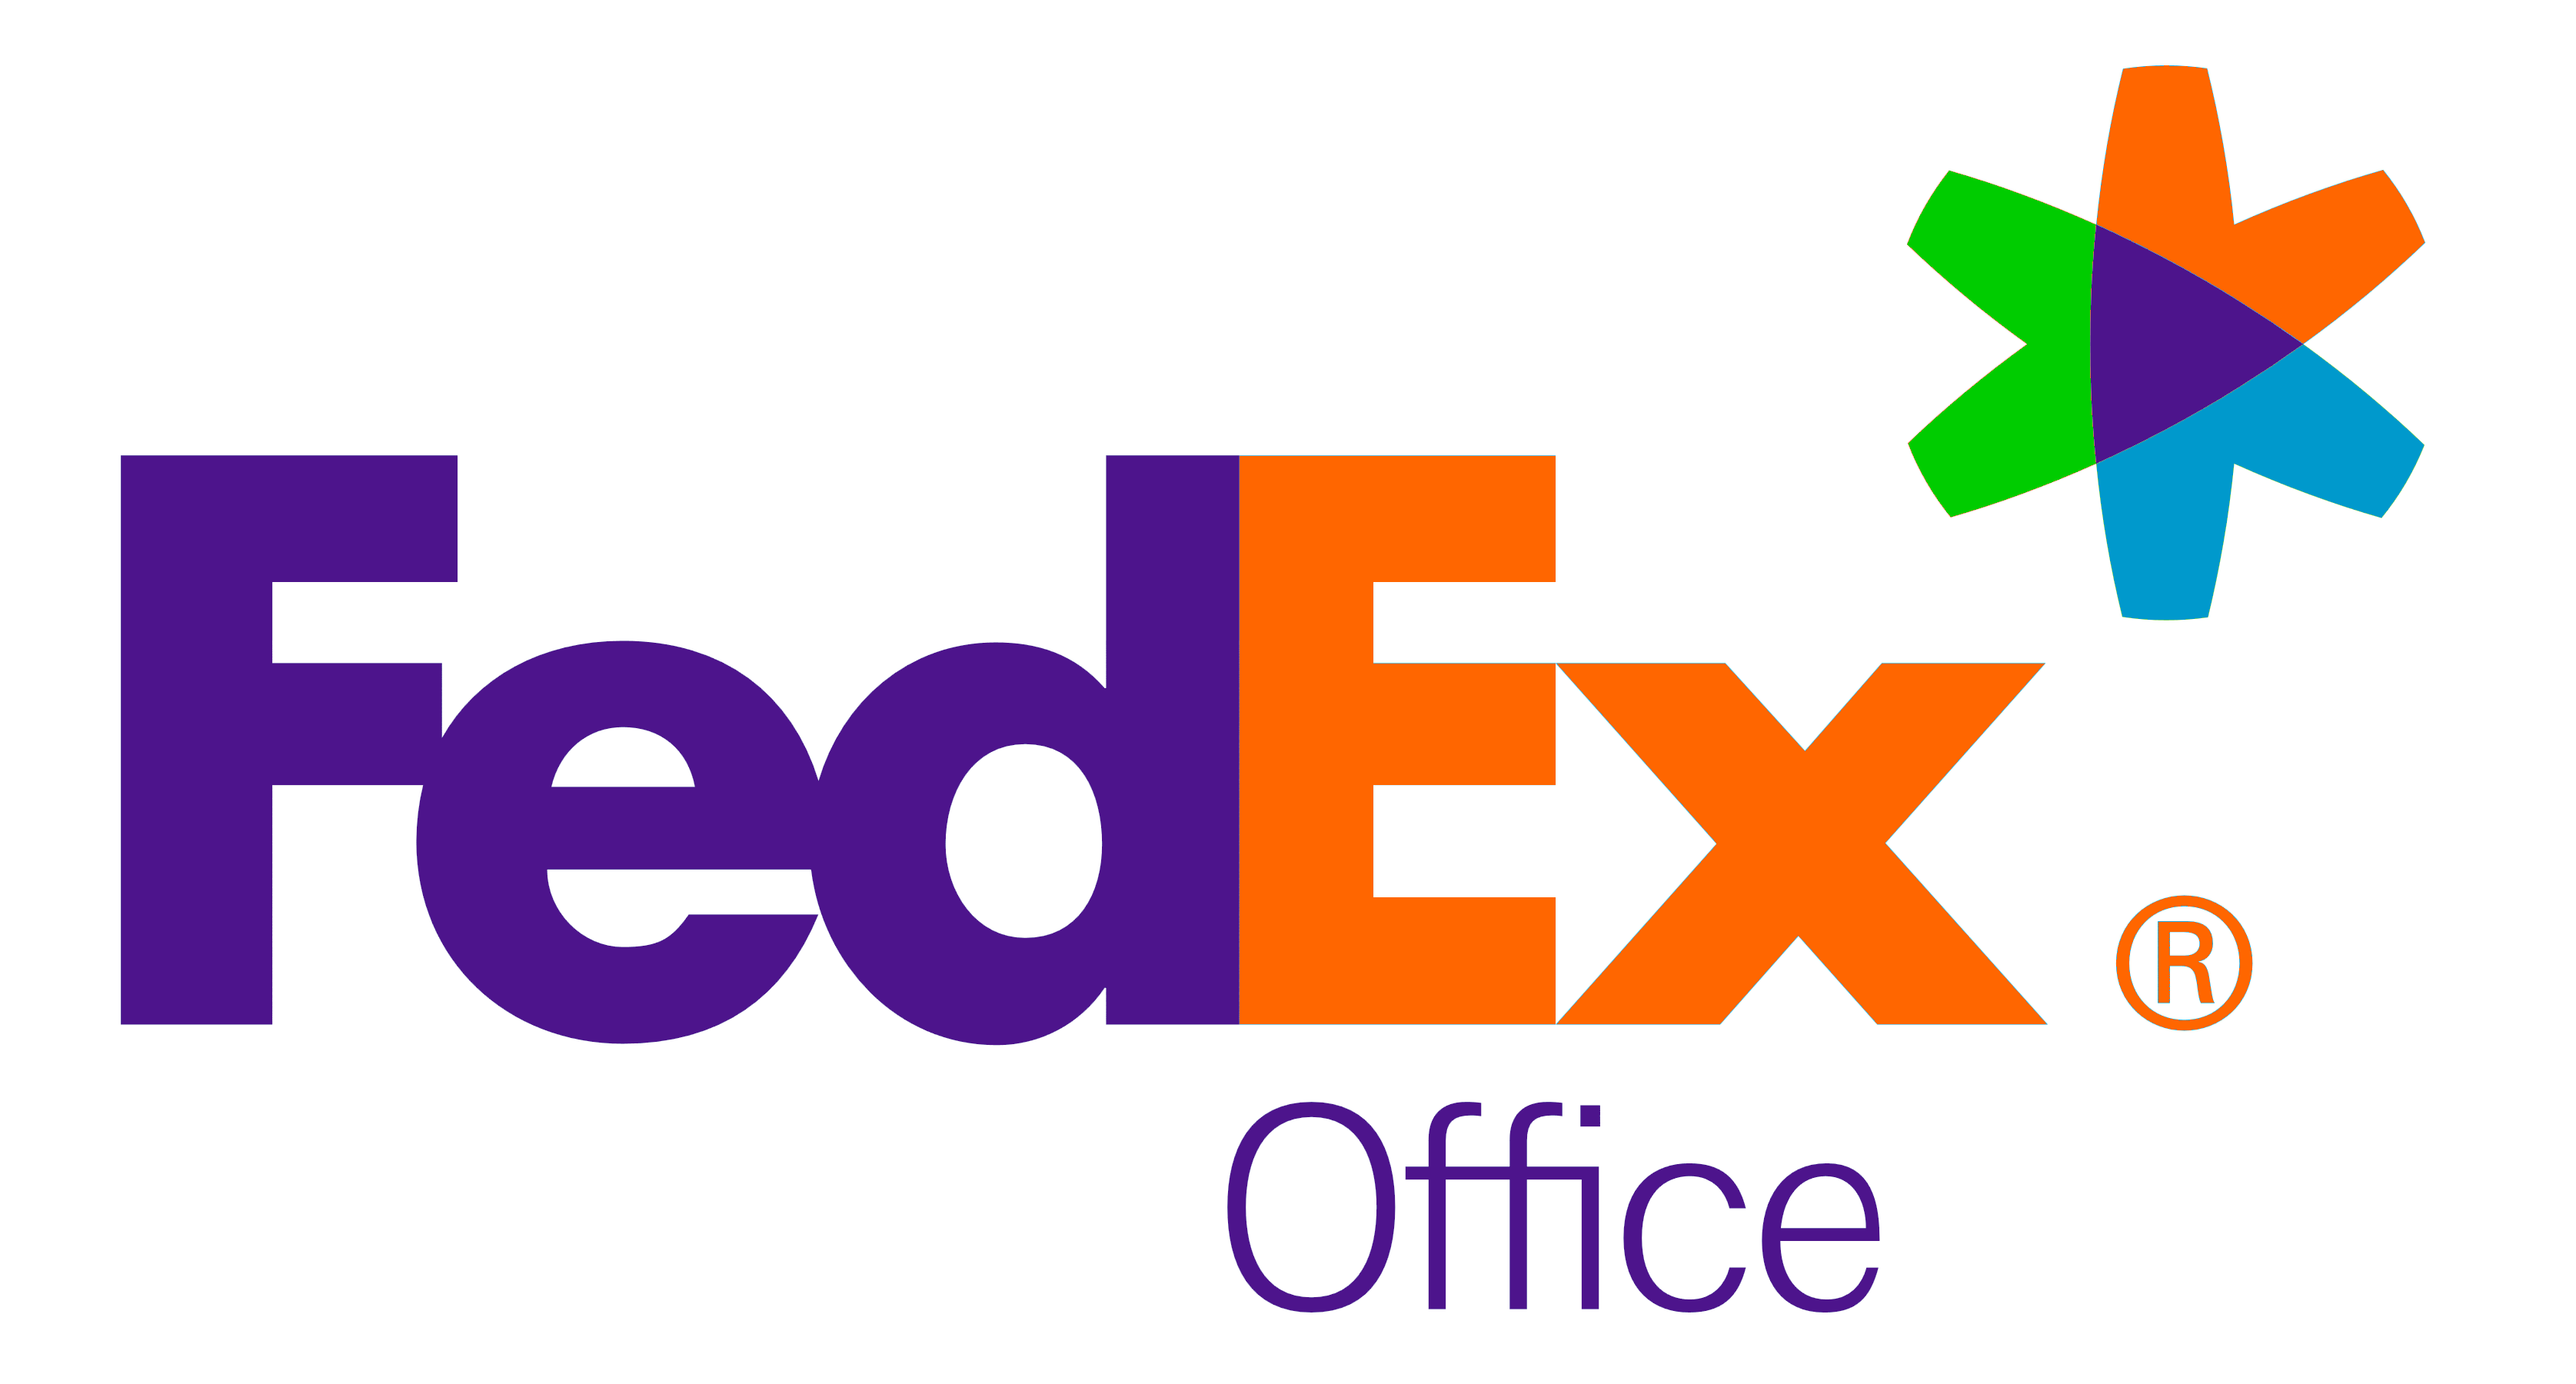 FedEx Office Beacon Logo - Fedex Office PNG Transparent Fedex Office.PNG Images. | PlusPNG